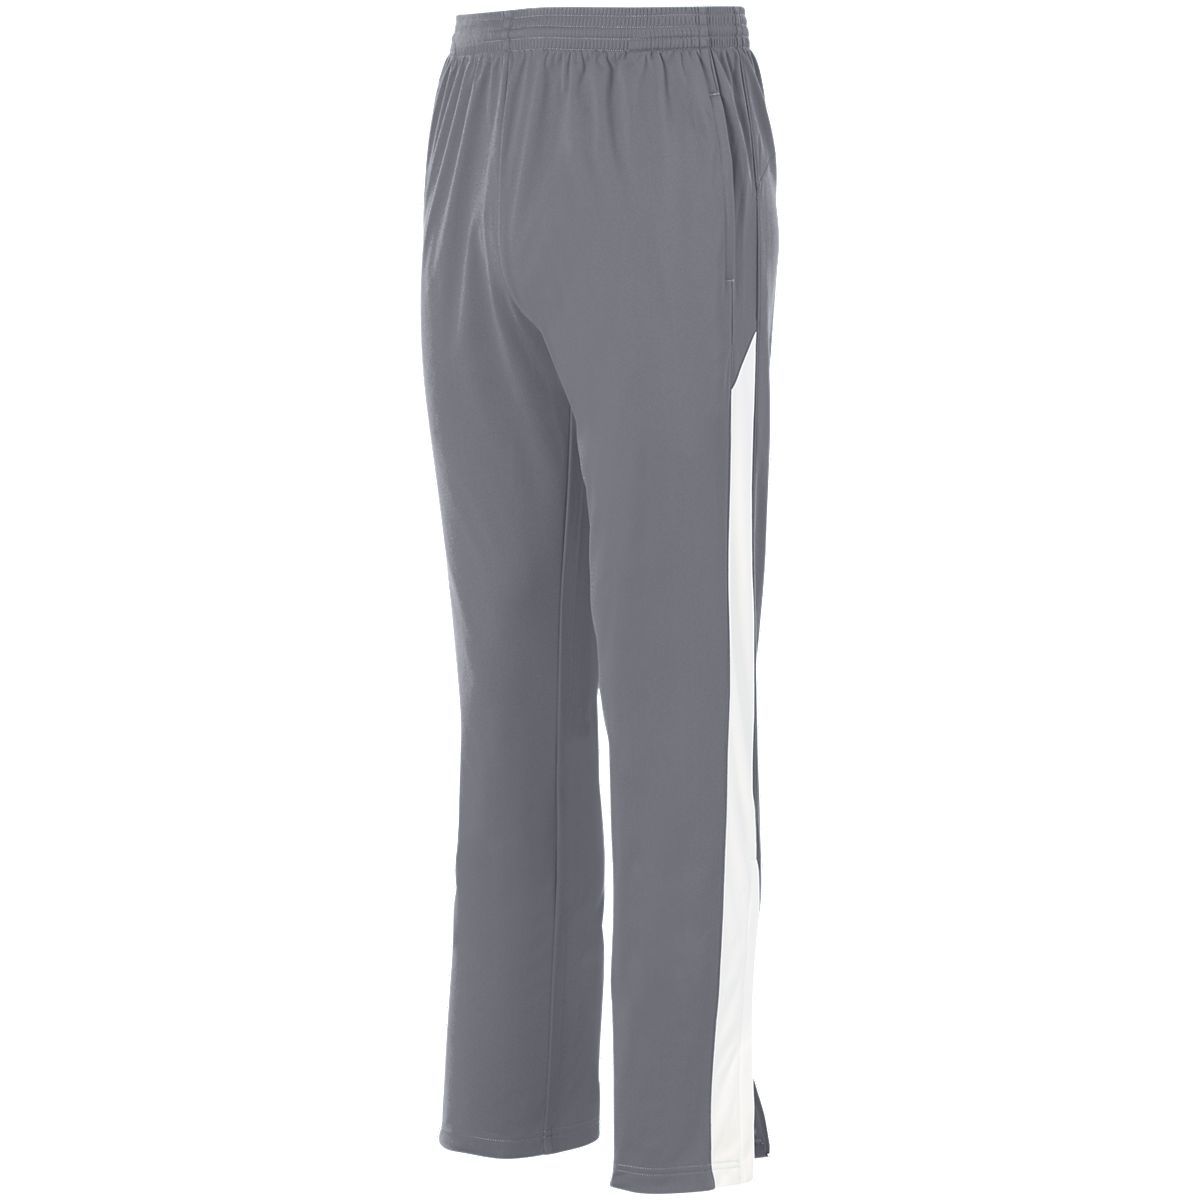 Augusta Sportswear Youth Medalist Pant 2.0 in Graphite/White  -Part of the Youth, Youth-Pants, Pants, Augusta-Products product lines at KanaleyCreations.com